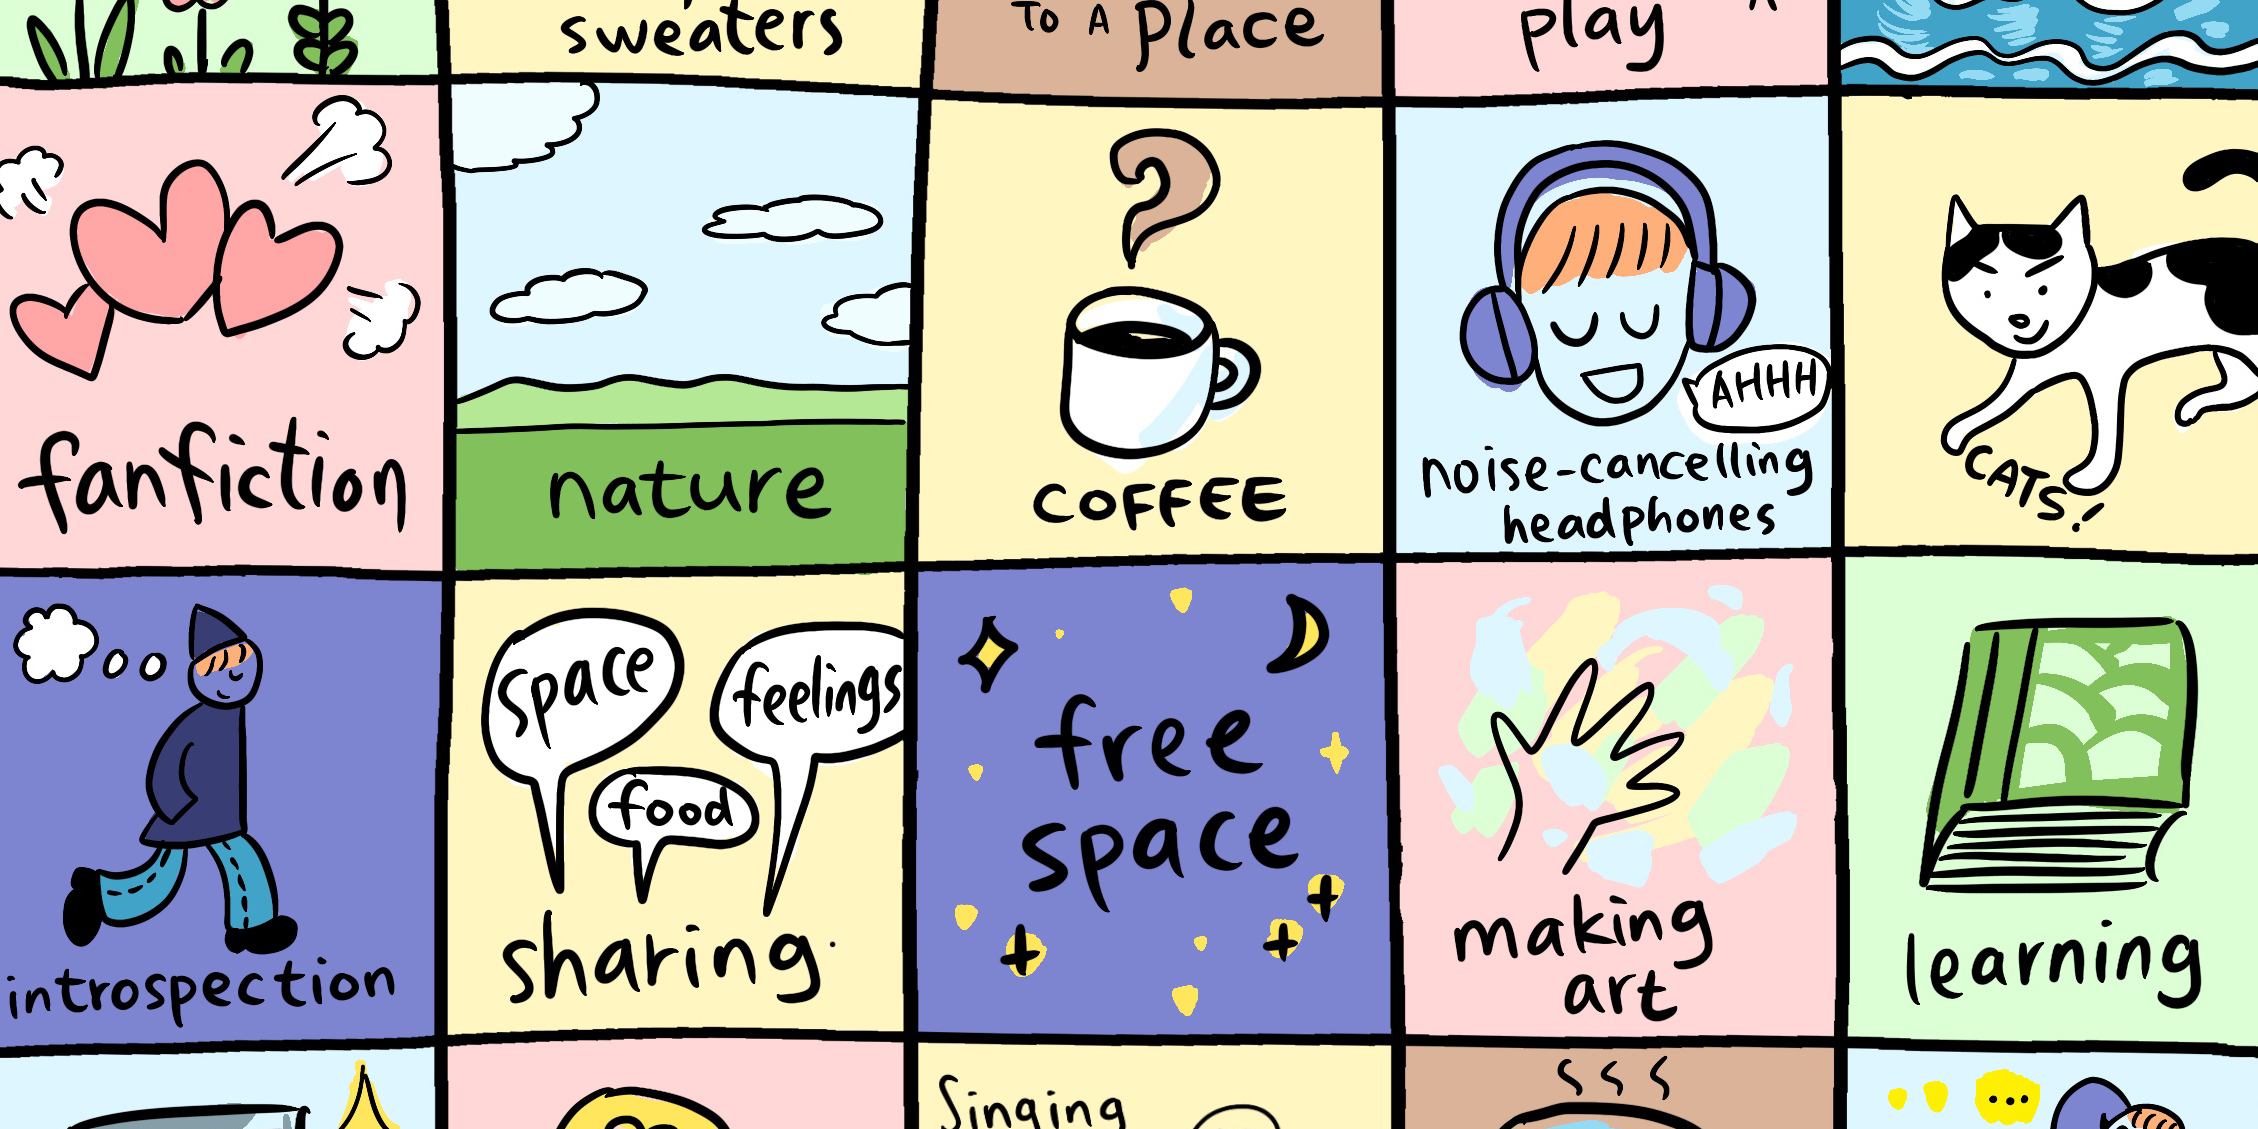 A hand drawn colorful grid in the style of a Bingo board. Spaces include: fanfiction, nature, coffee, noise cancelling headphones, cats, introspection, sharing, making art, and learning. There is also a free space in the center.